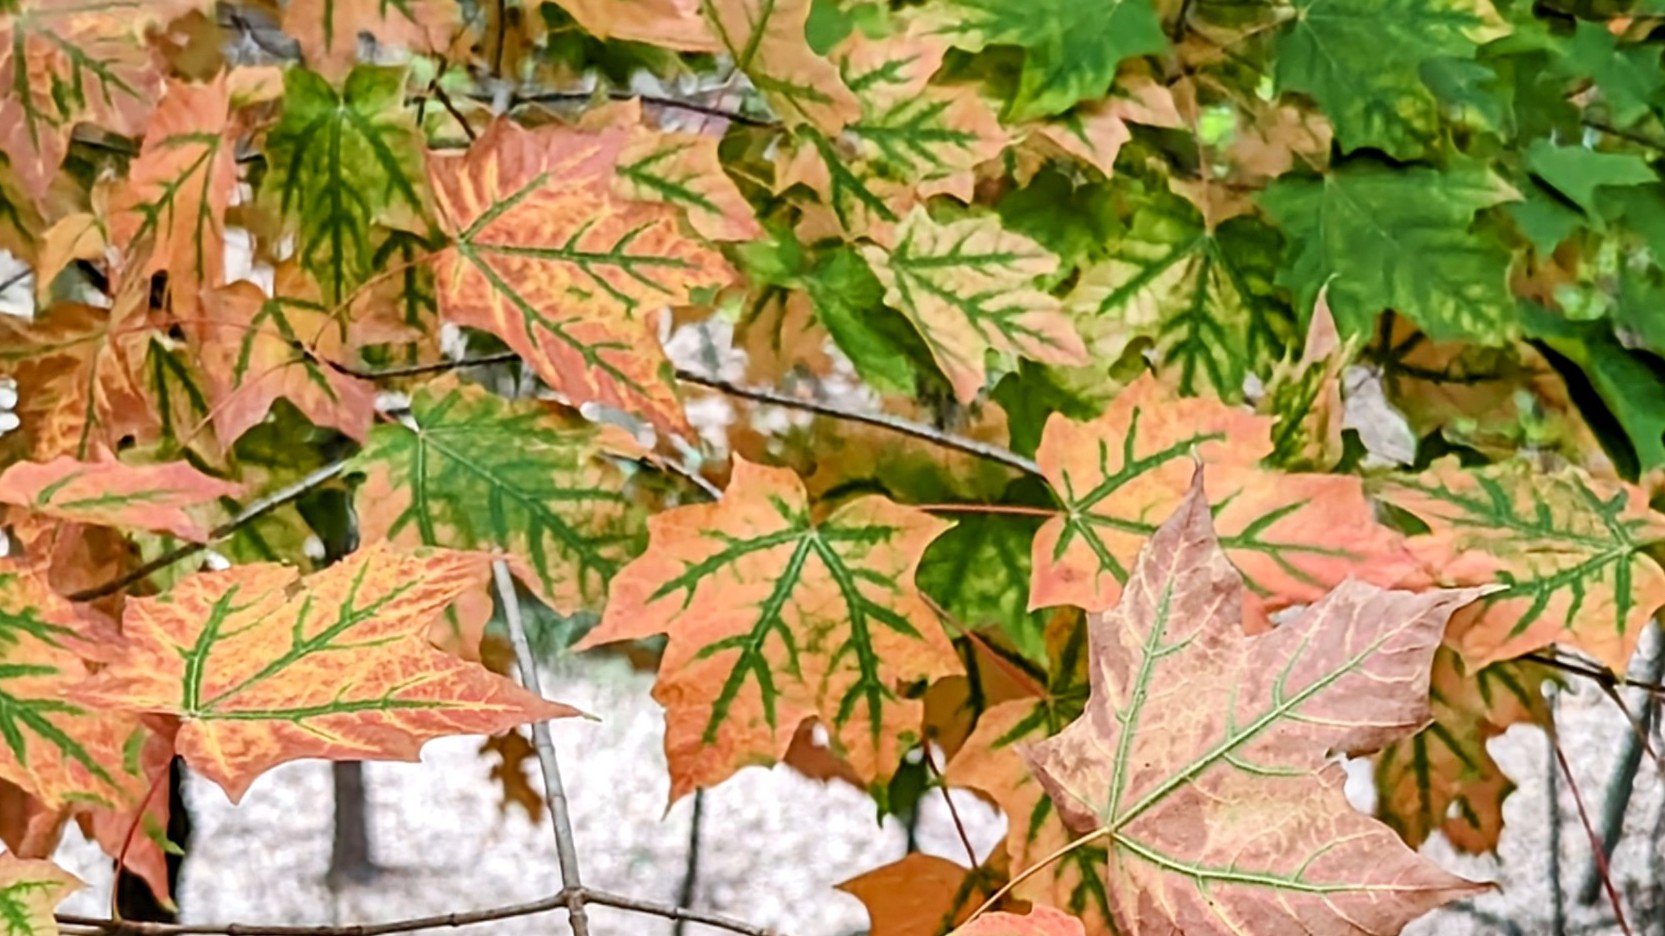 Maple leaves on sand dunes in early September have just started to change color. Michigan, 2023